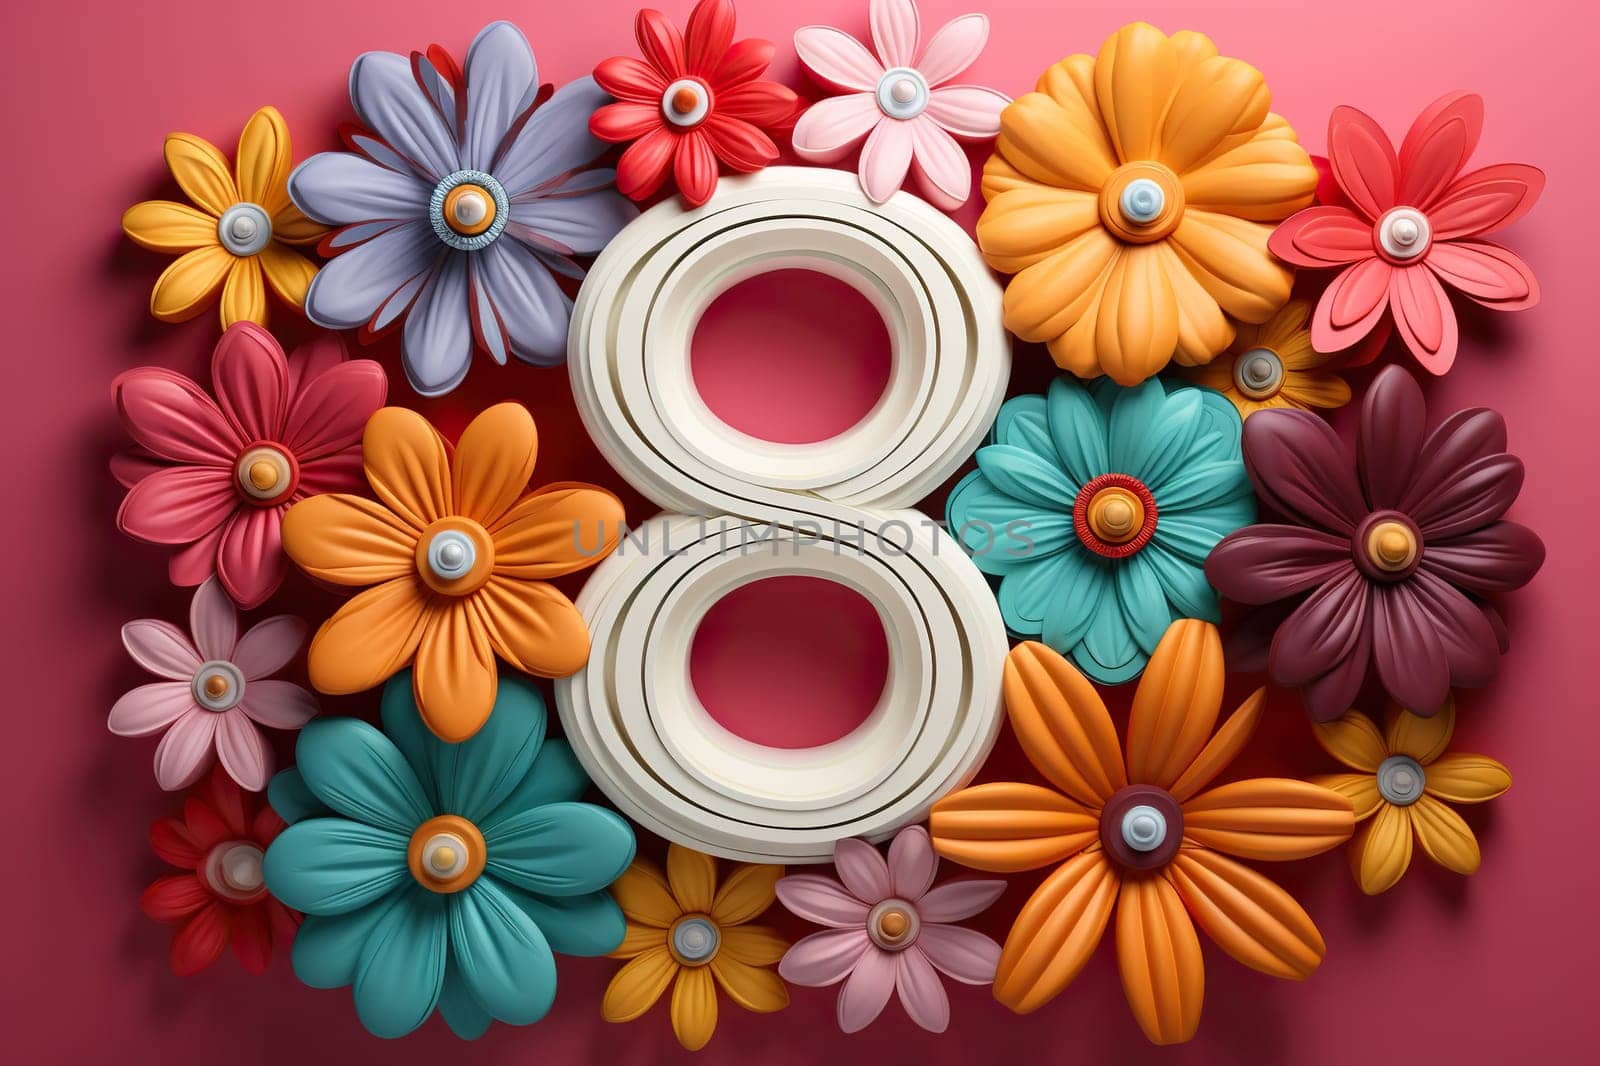 Composition with the number 8 and flowers made of paper, plasticine. March 8 concept. Generated by artificial intelligence by Vovmar